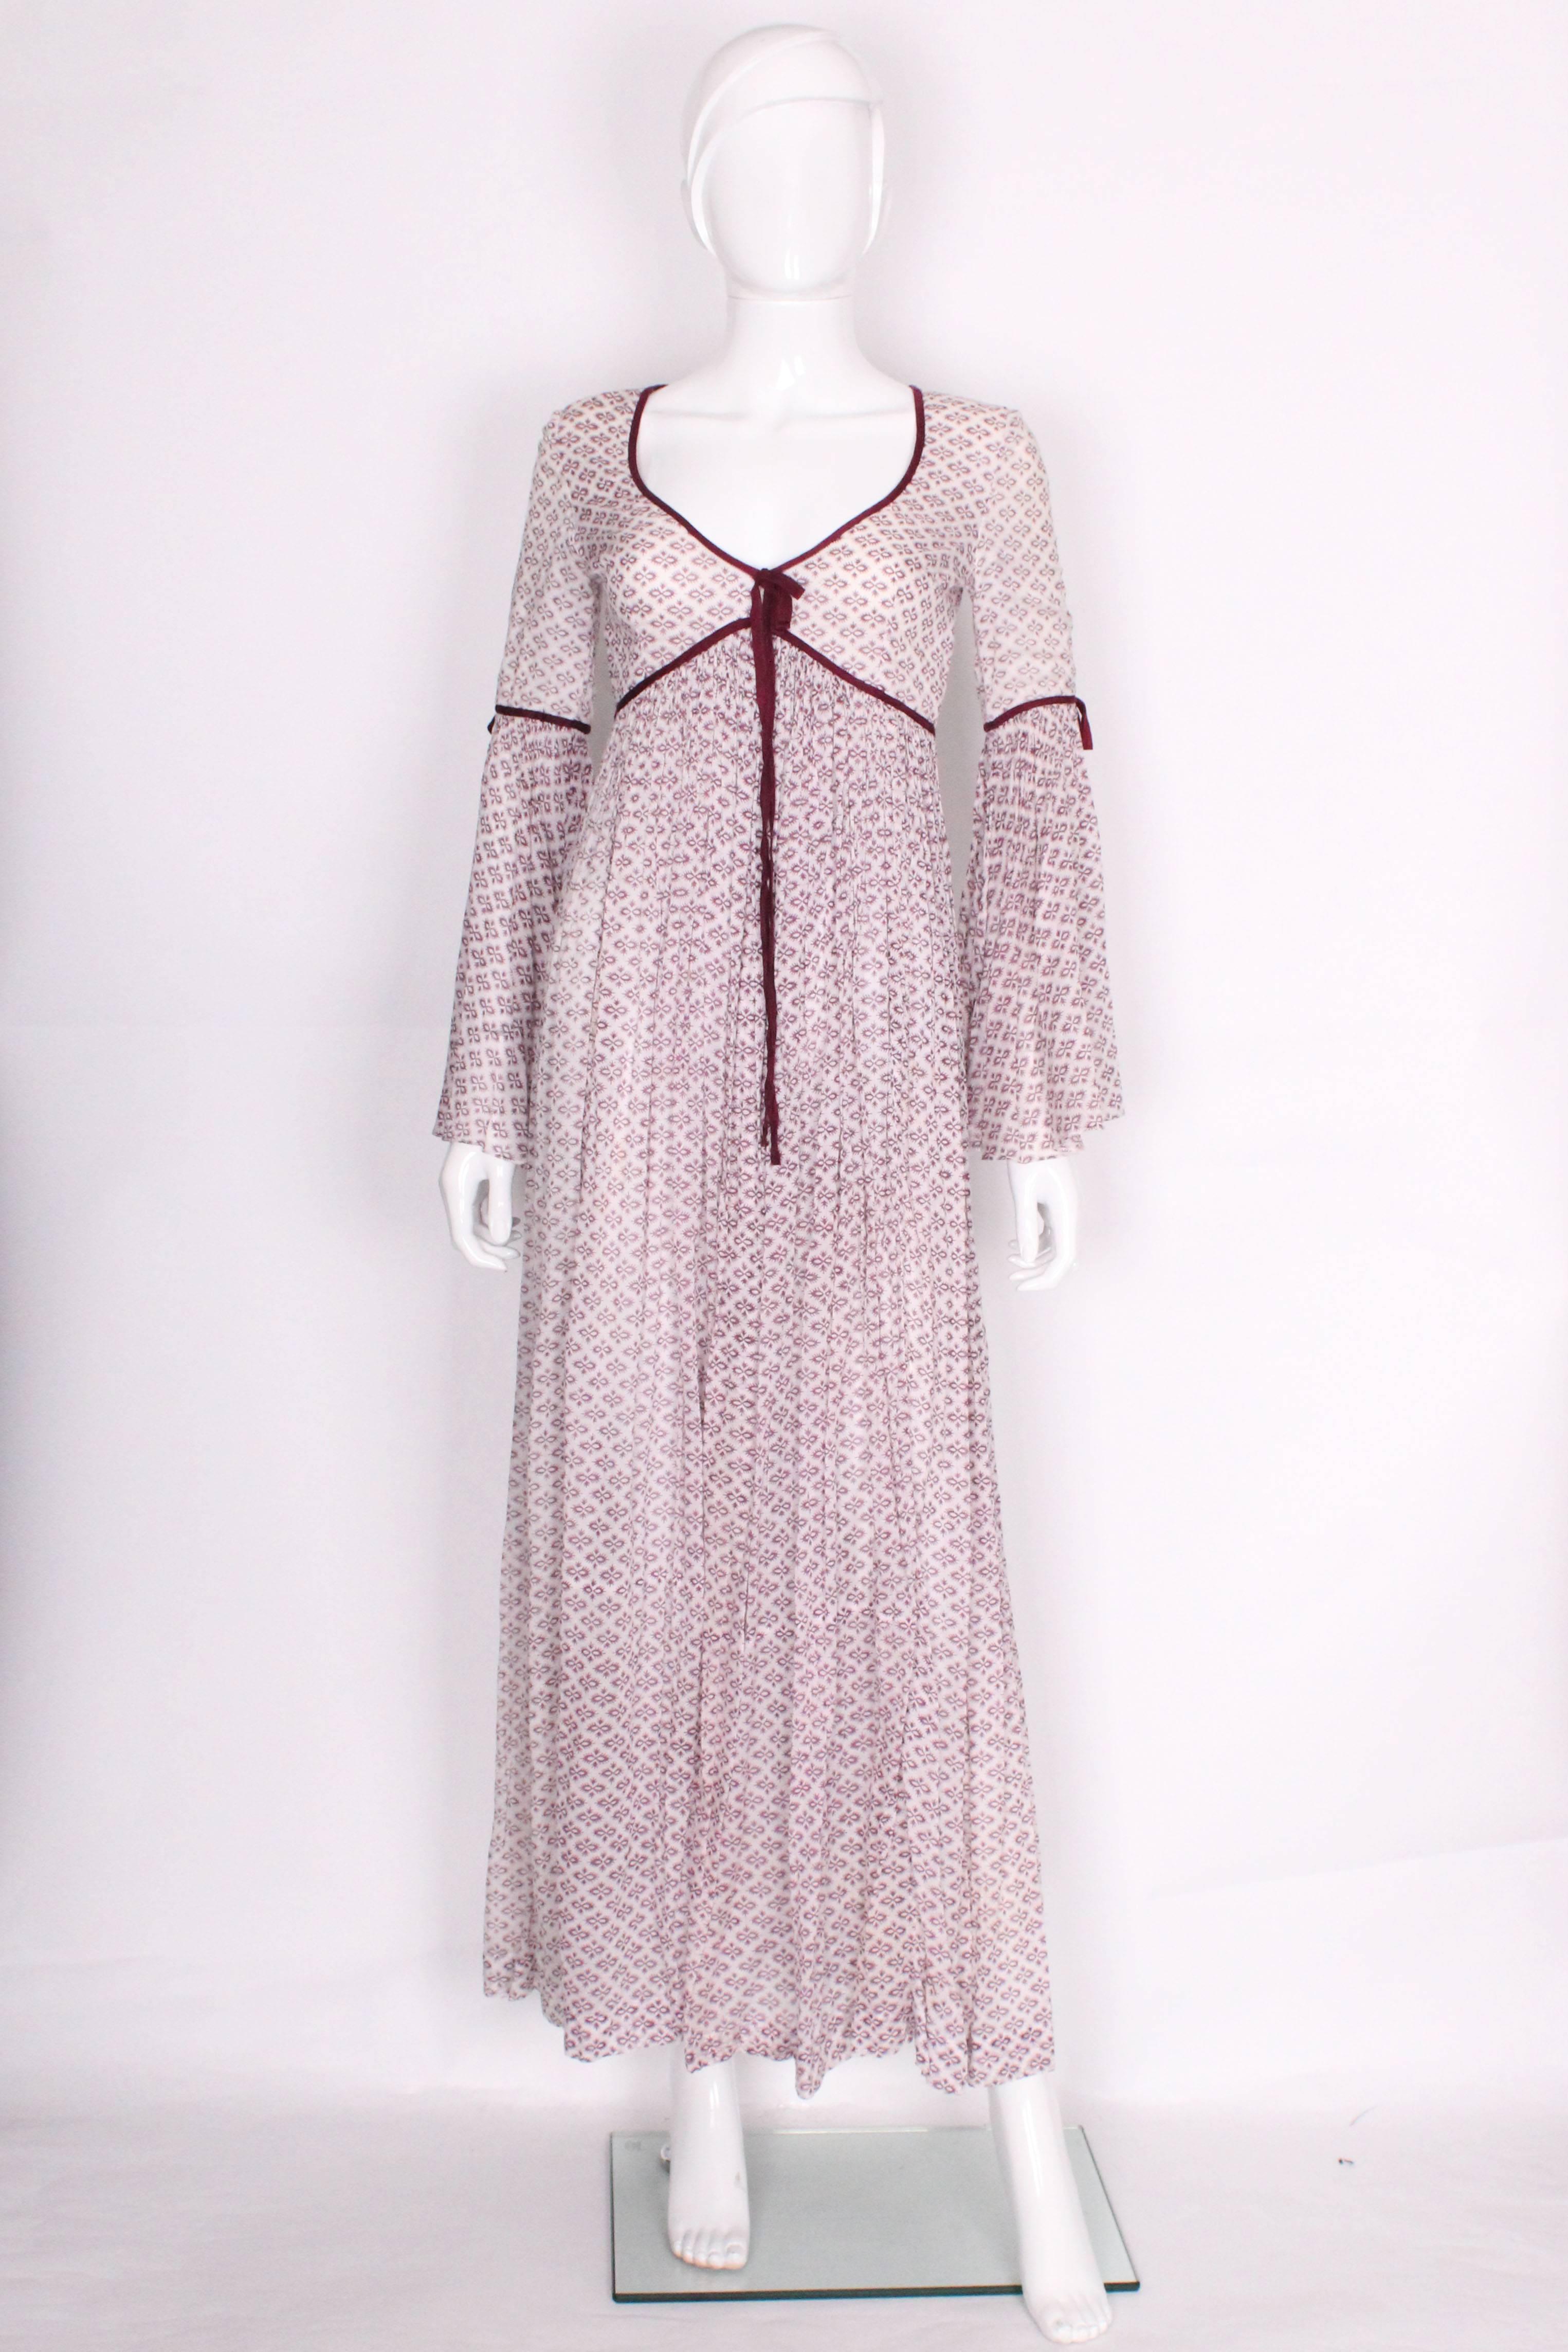 This is a great boho maxi dress by British designer Colin Glascoe. Made of several layers of fine cotton, the outerlayer is white with a geometric burgundy print, and the inner layer is also white cotton. The dress has a v-neckline edged in a dark